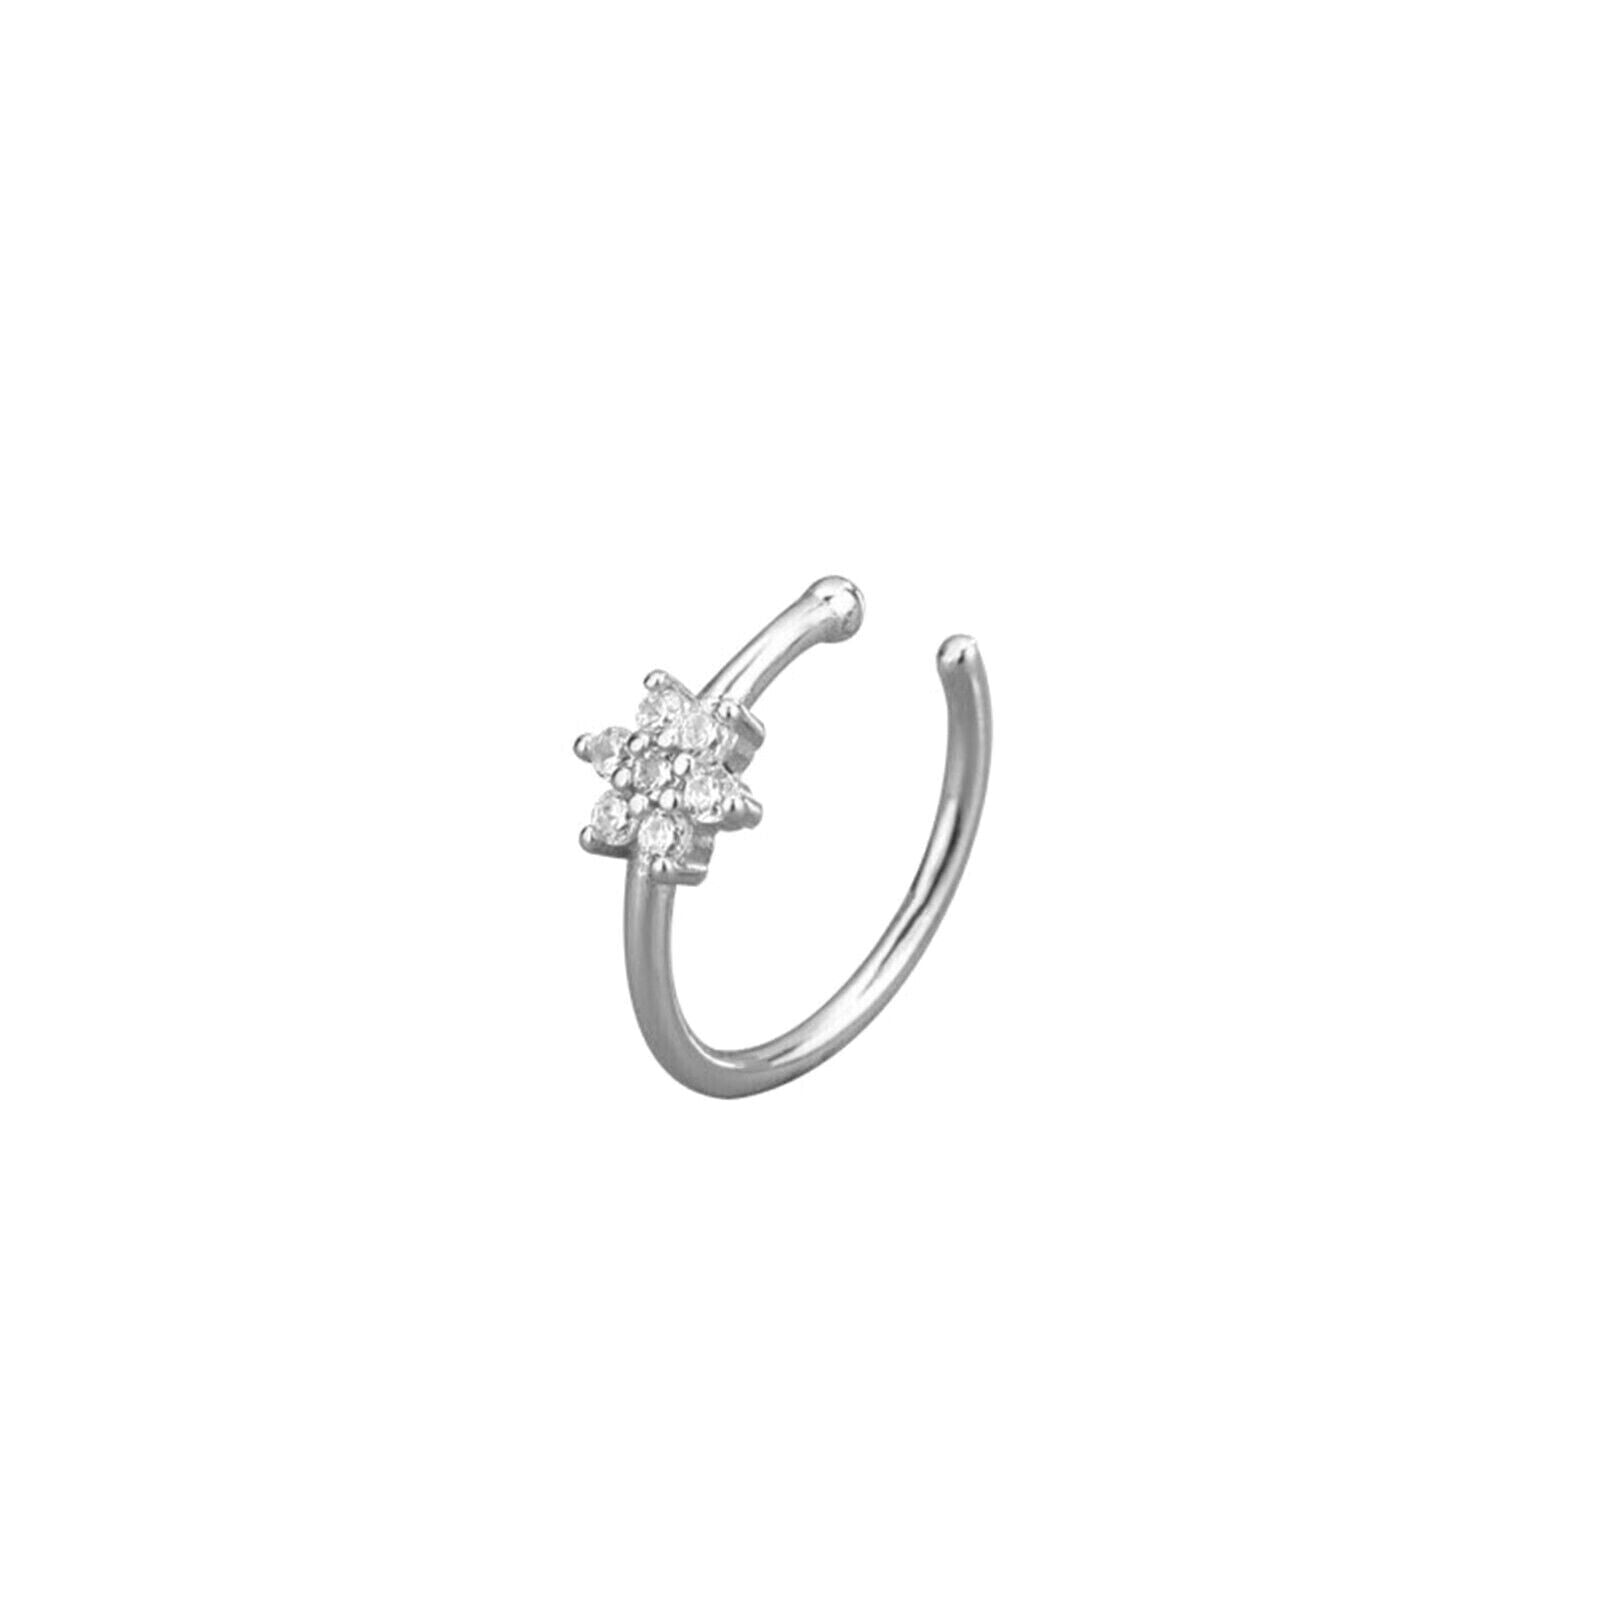 Buy 22 Gauge Nose Ring Diamond Hoop Nose Ring daith Piercings Surgical  Steel Nose Ring Thin cz Nose Ring Hoop Set Cartilage Earrings Stud Ear Hoop  Piercing Body Jewelry Nose Ring for